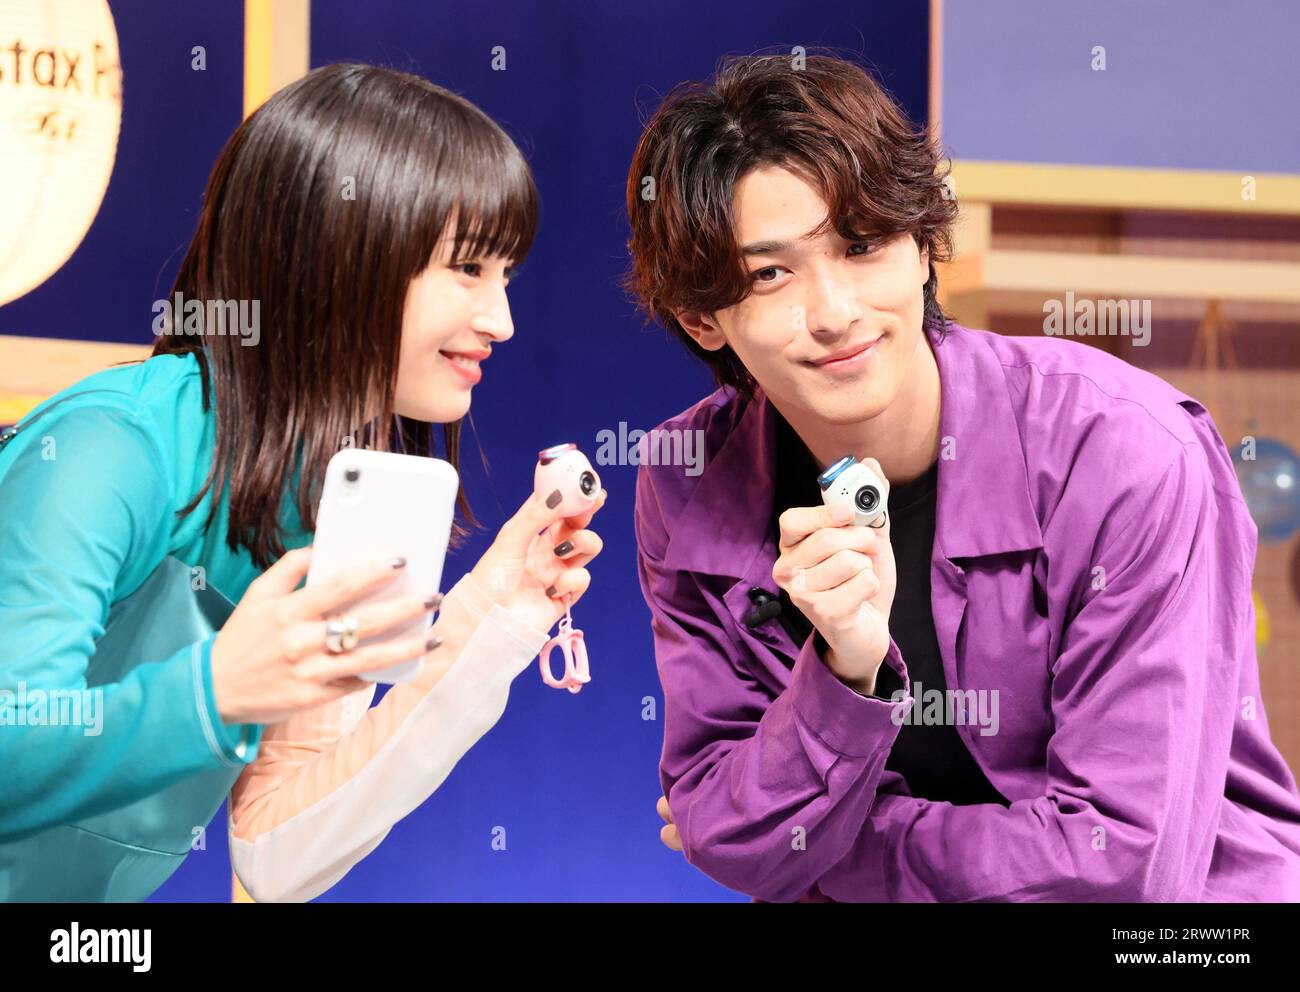 Tokyo, Japan. 21st Sep, 2023. Japanese actor Ryusei Yokohama (R) and actress Suzu Hirose (L) attend a promotional event of Fujifilm's new tiny digital camera 'Instax Pal' which enables to connect with smart phone or instant photo printer in Tokyo on Thursday, September 21, 2023. The Instax Pal which has a wide angle lens equibalent to 16mm in 35mm camera will go on sale on October 5. (photo by Yoshio Tsunoda/AFLO) Stock Photo